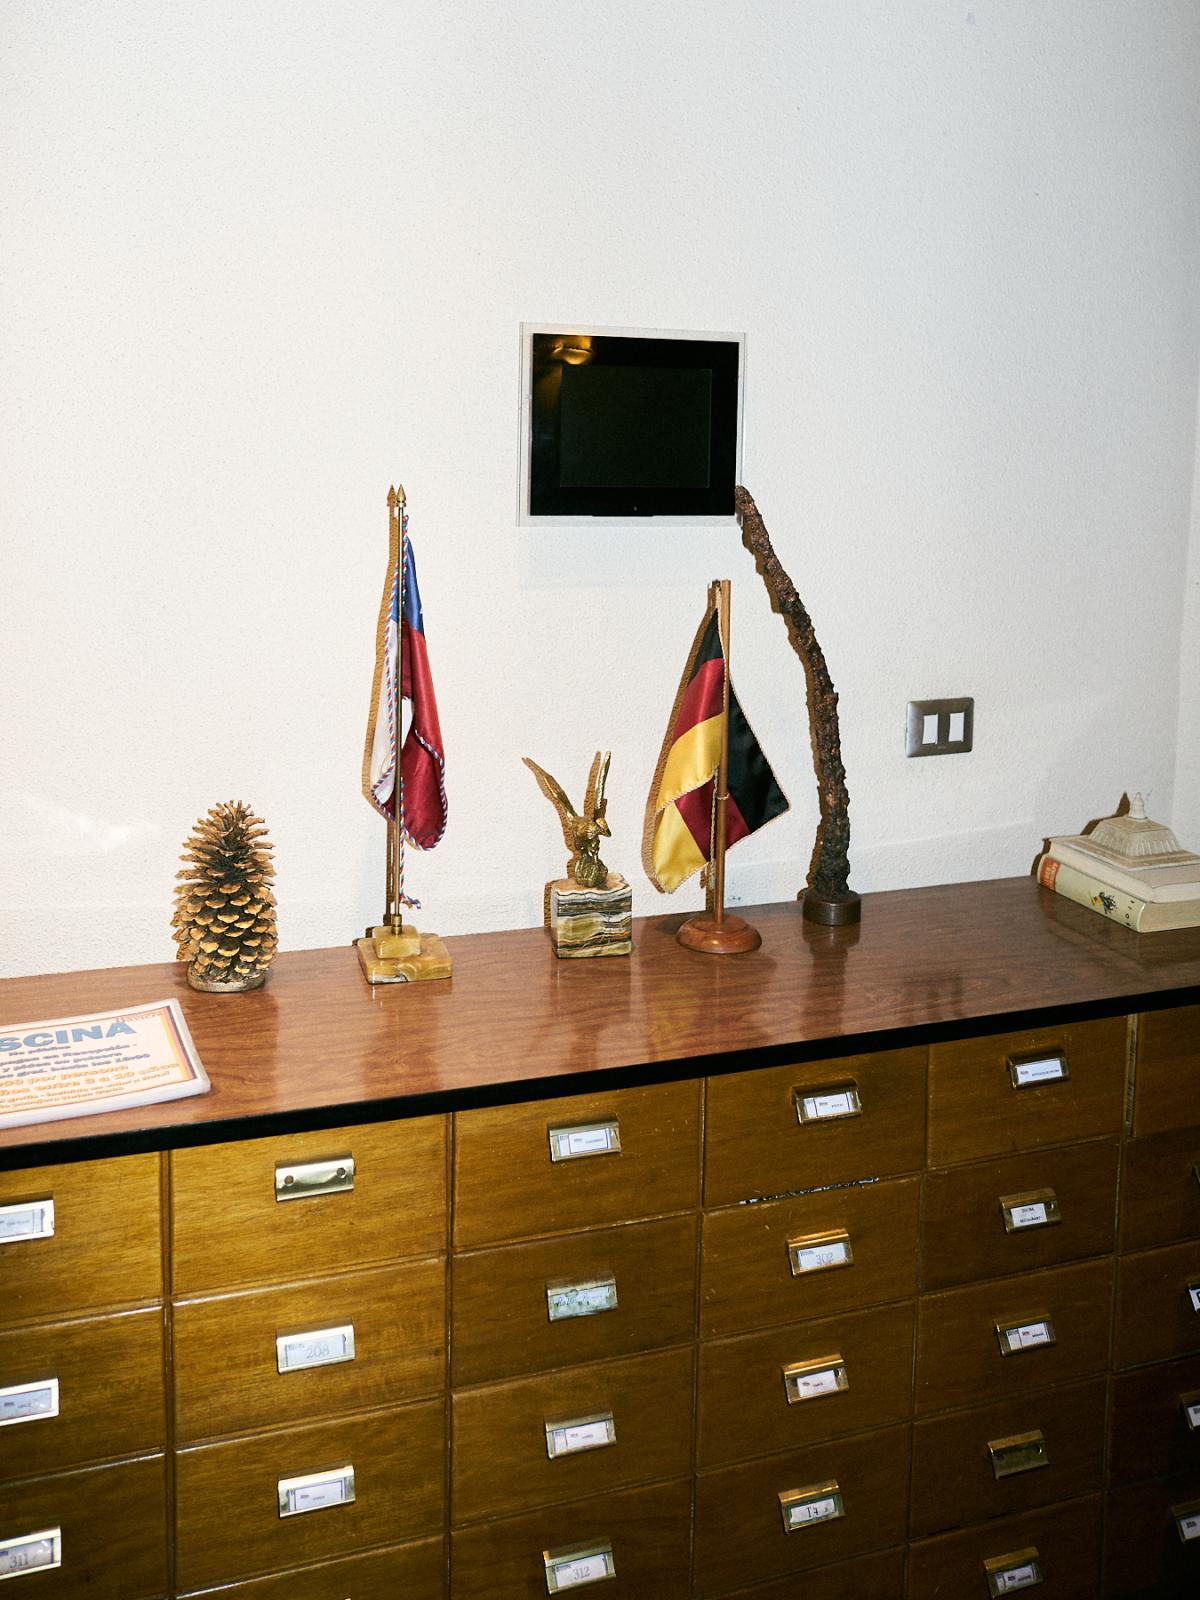 The brief glimpse of a settler's dream - Chilean and German flags behind the desk in the...